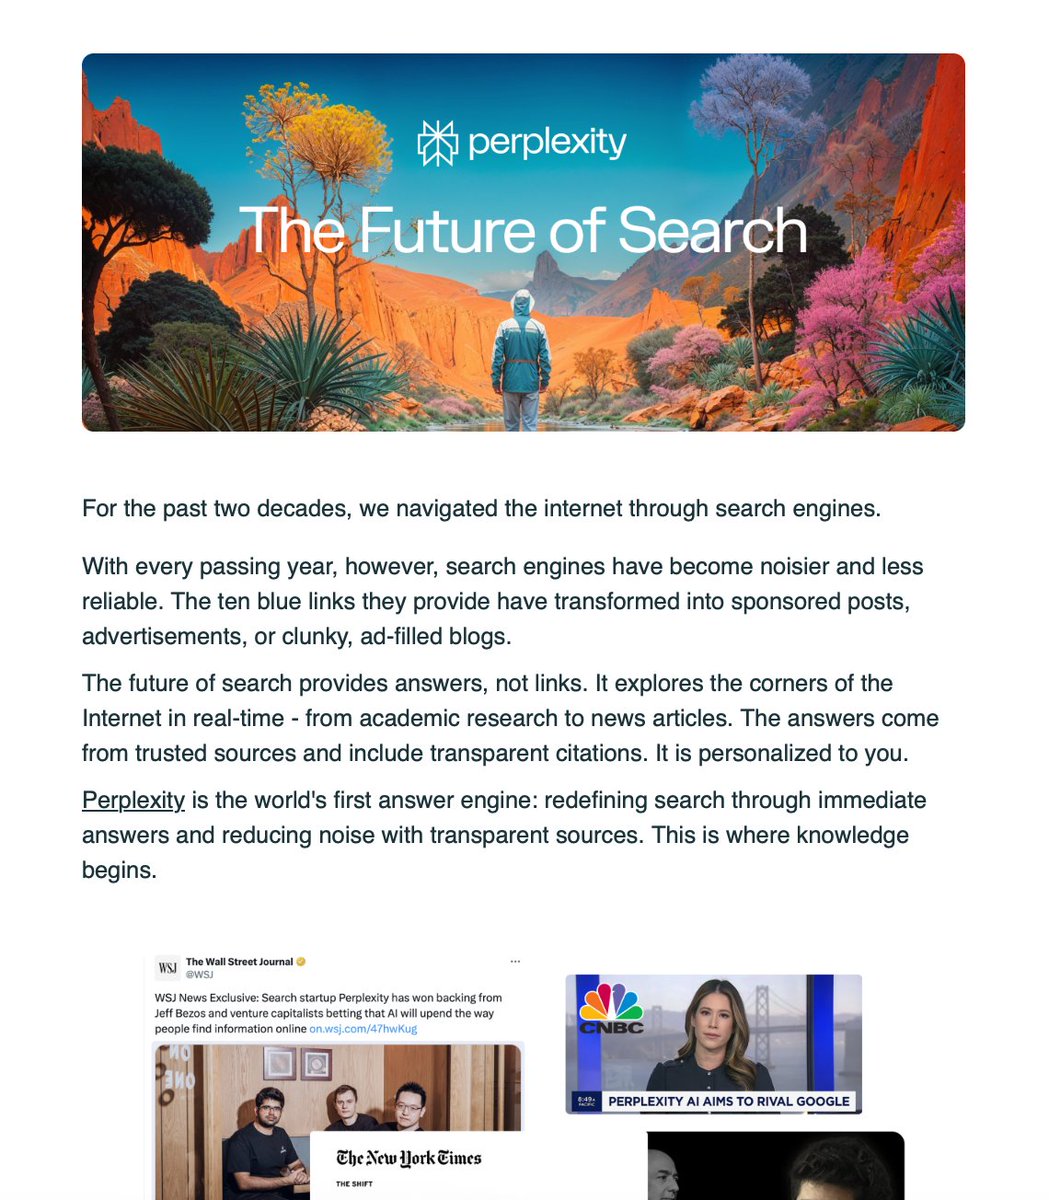 Can AI chats replace search engines? See below from @perplexity_ai on the Feature of Search #seo #ai IMO Users will choose the best experience so the future is Answers > Links (however, the content creators need to be incentivized and get some organic clicks from the new CHERPS